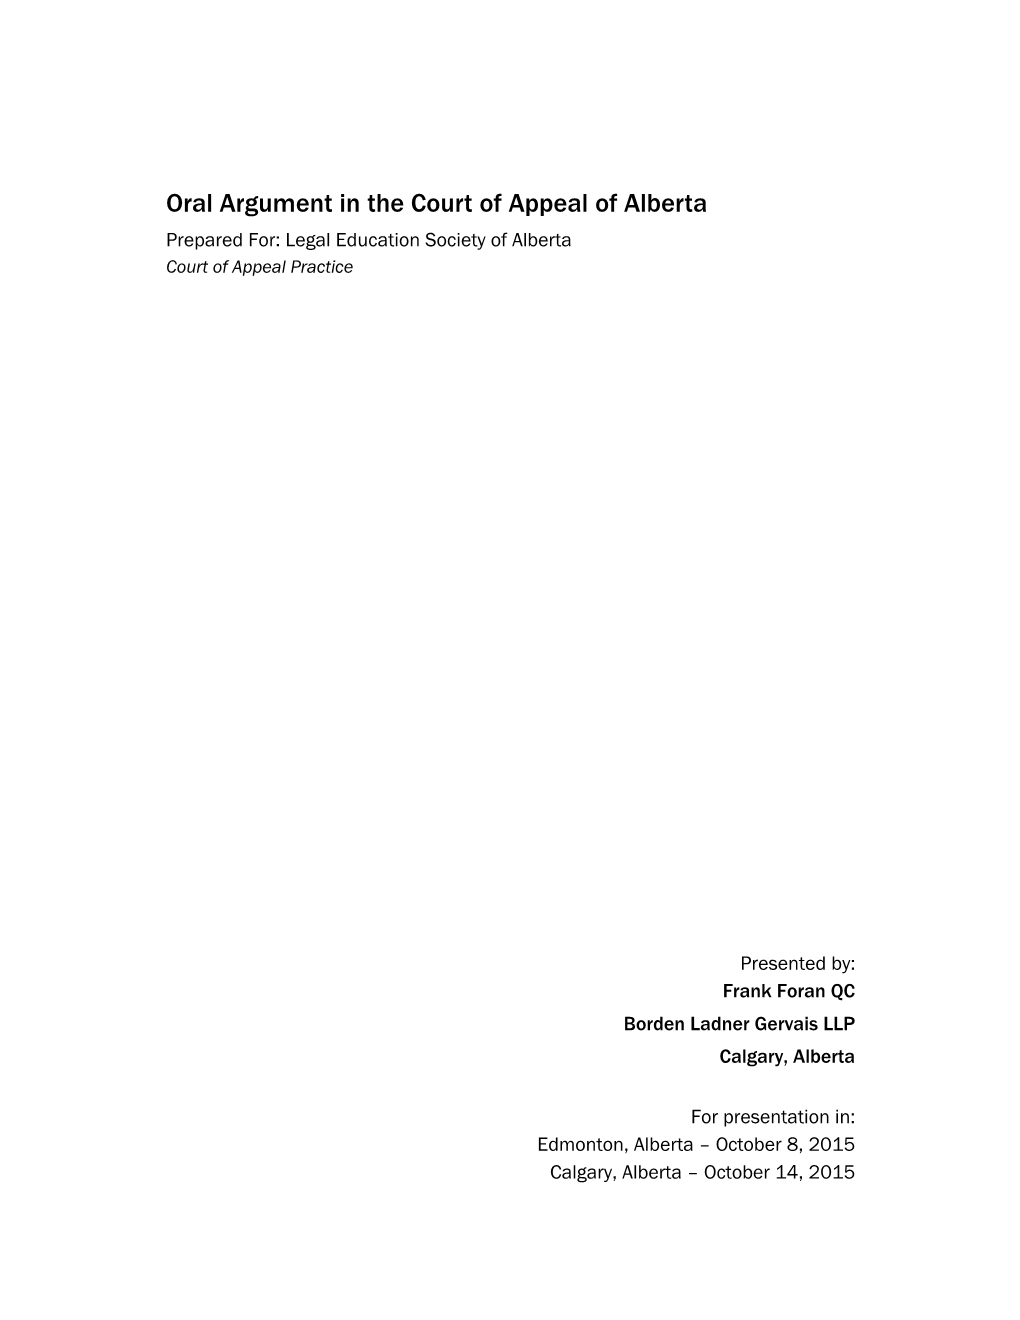 Oral Argument in the Court of Appeal of Alberta Prepared For: Legal Education Society of Alberta Court of Appeal Practice